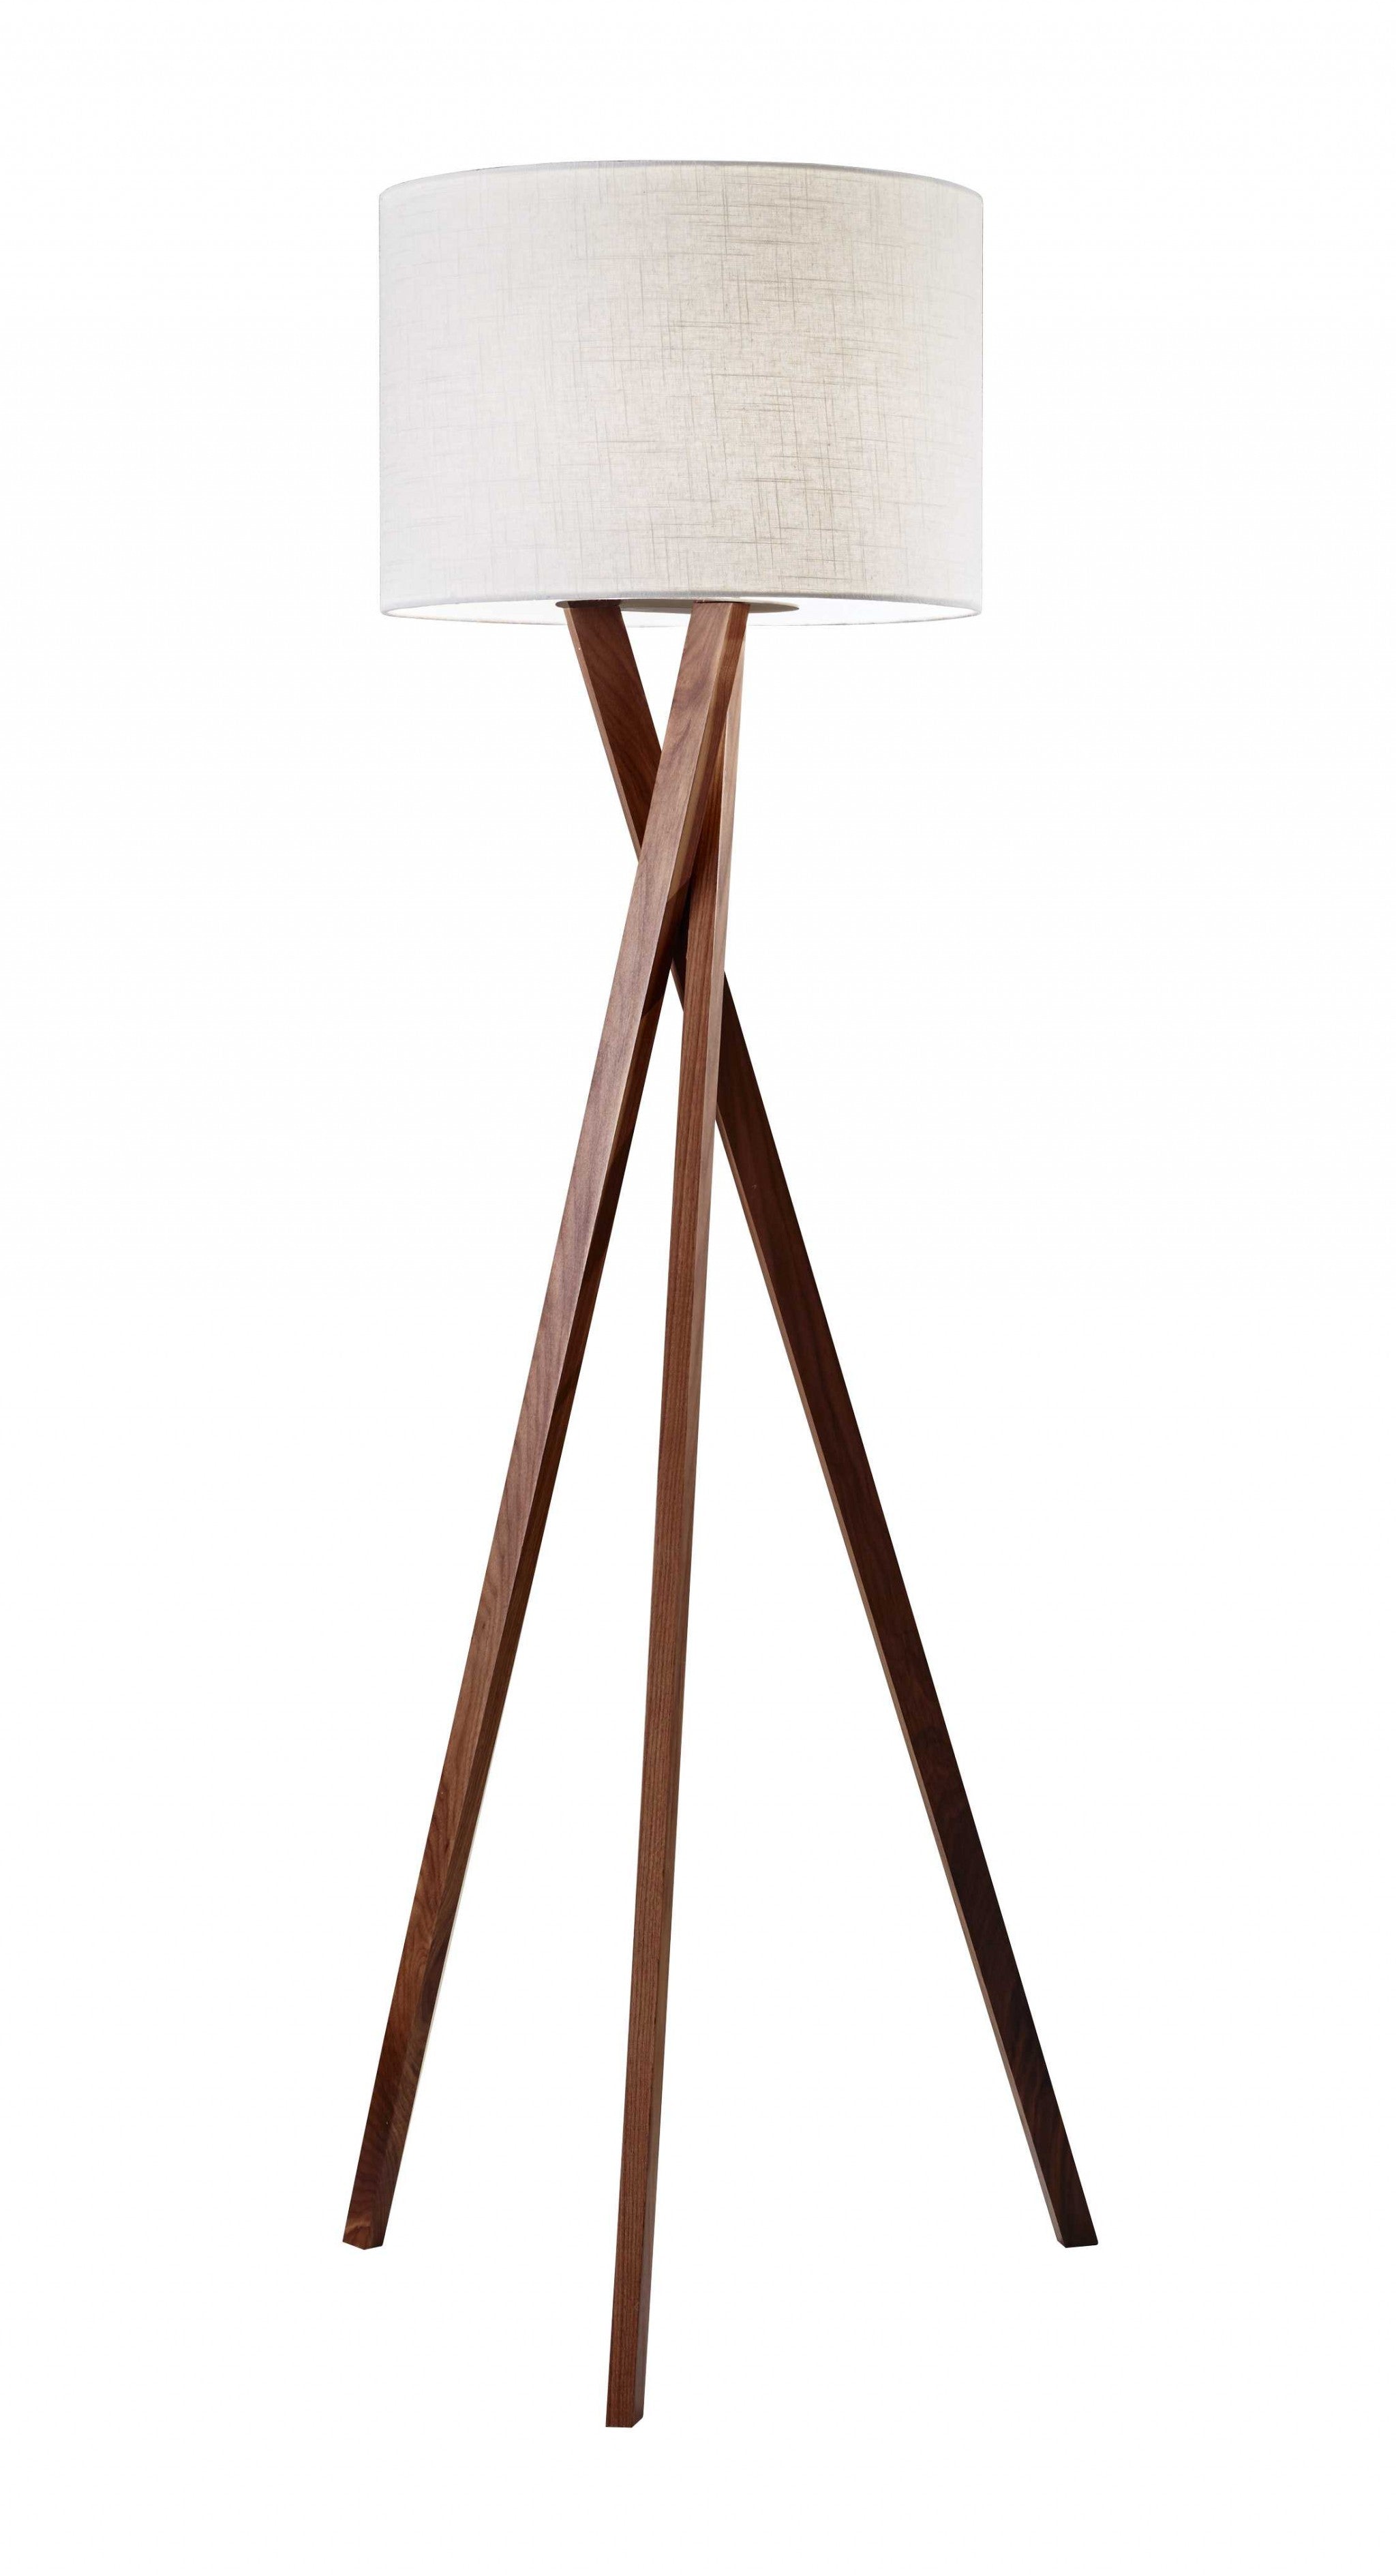 63" Solid Wood Tripod Floor Lamp With White Drum Shade